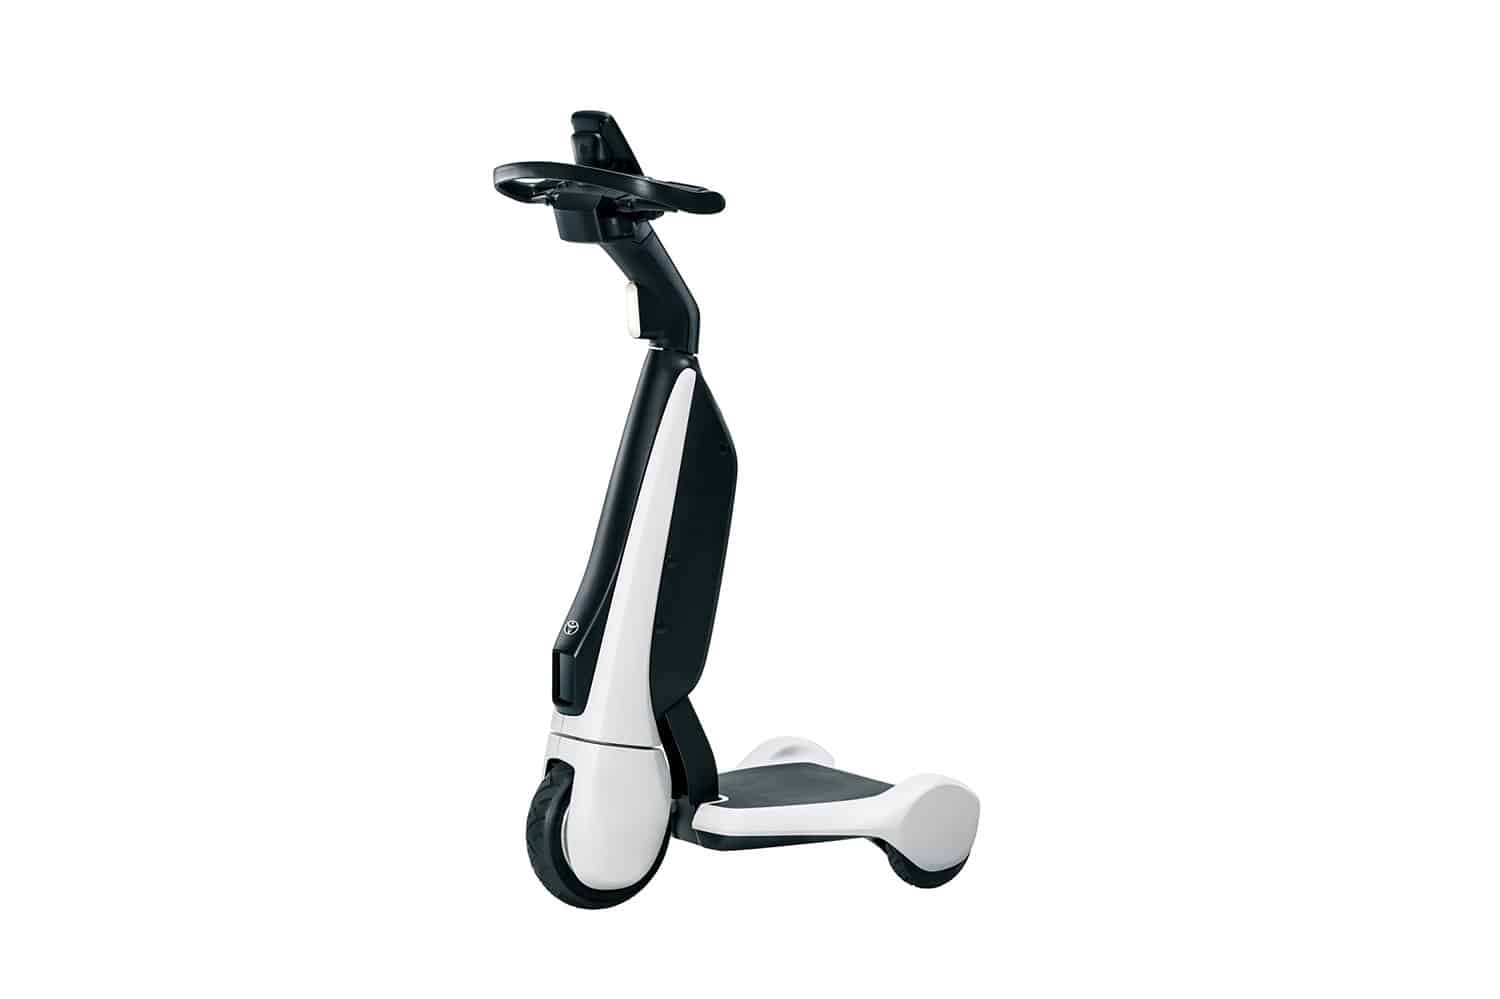 Toyota launches C+walk T, a three-wheeled stand-up e-scoot for walking areas.